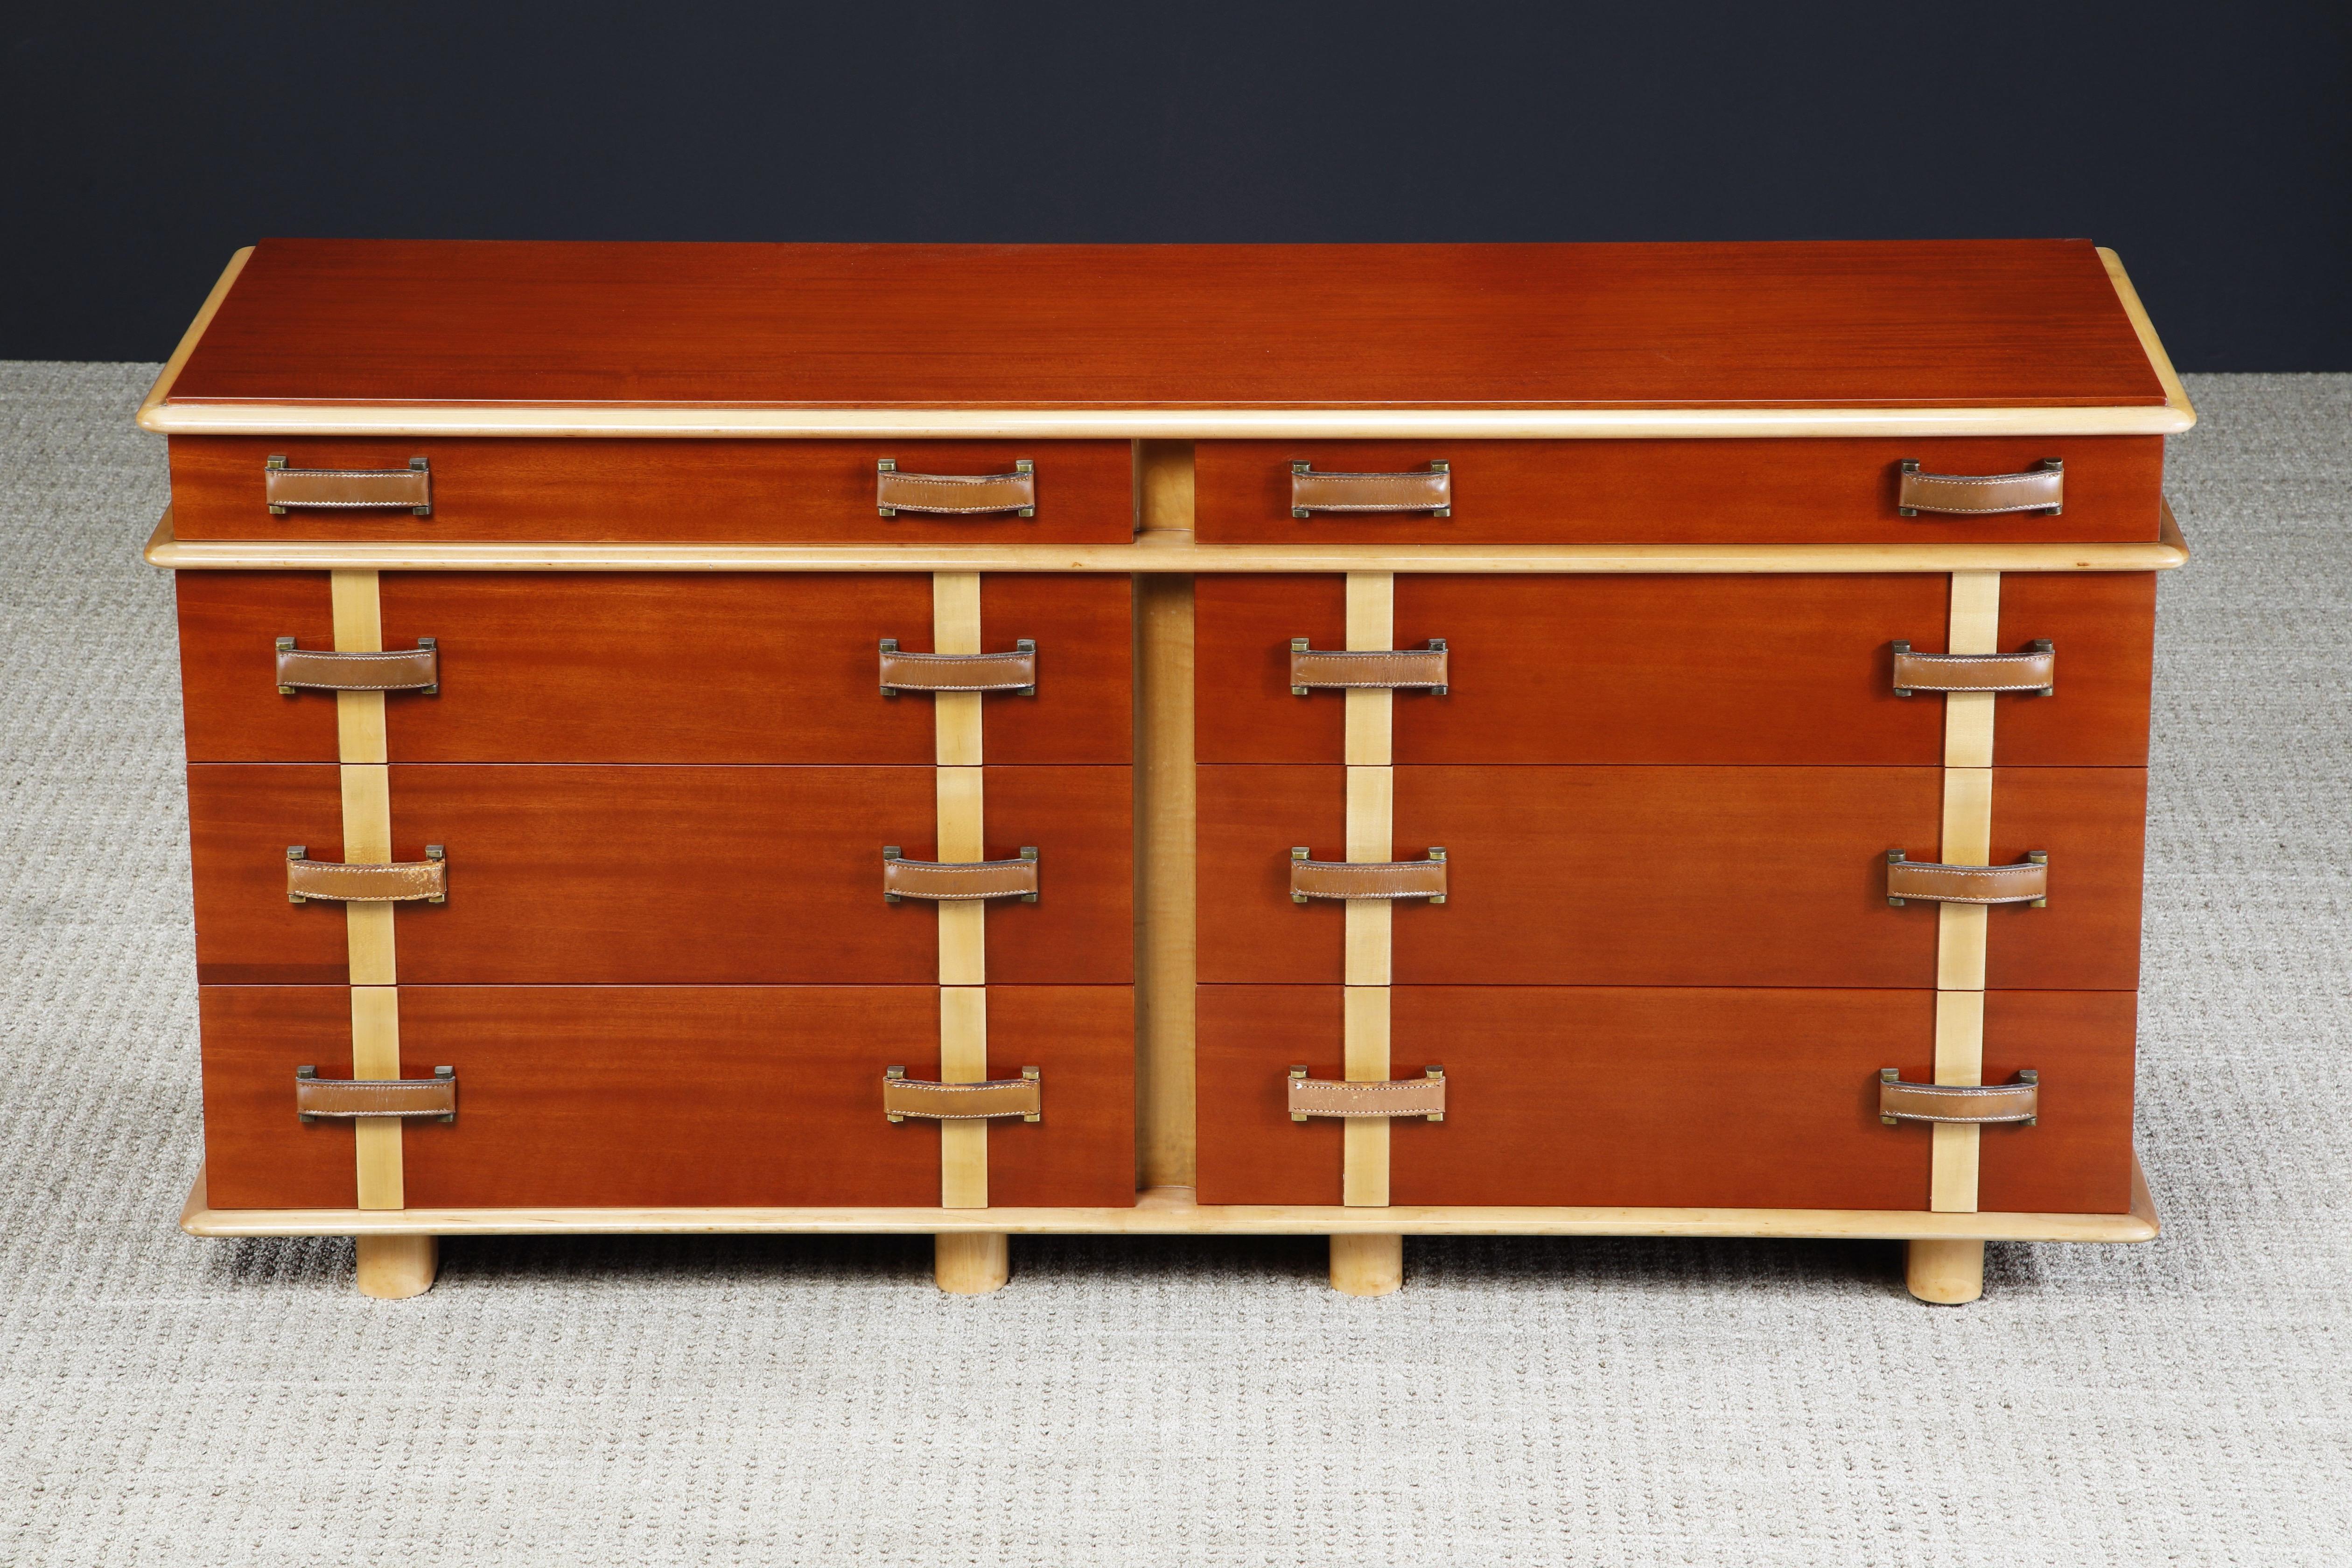 Mid-Century Modern 'Station Wagon' Dresser by Paul Frankl for Johnson Furniture, c. 1945, Signed